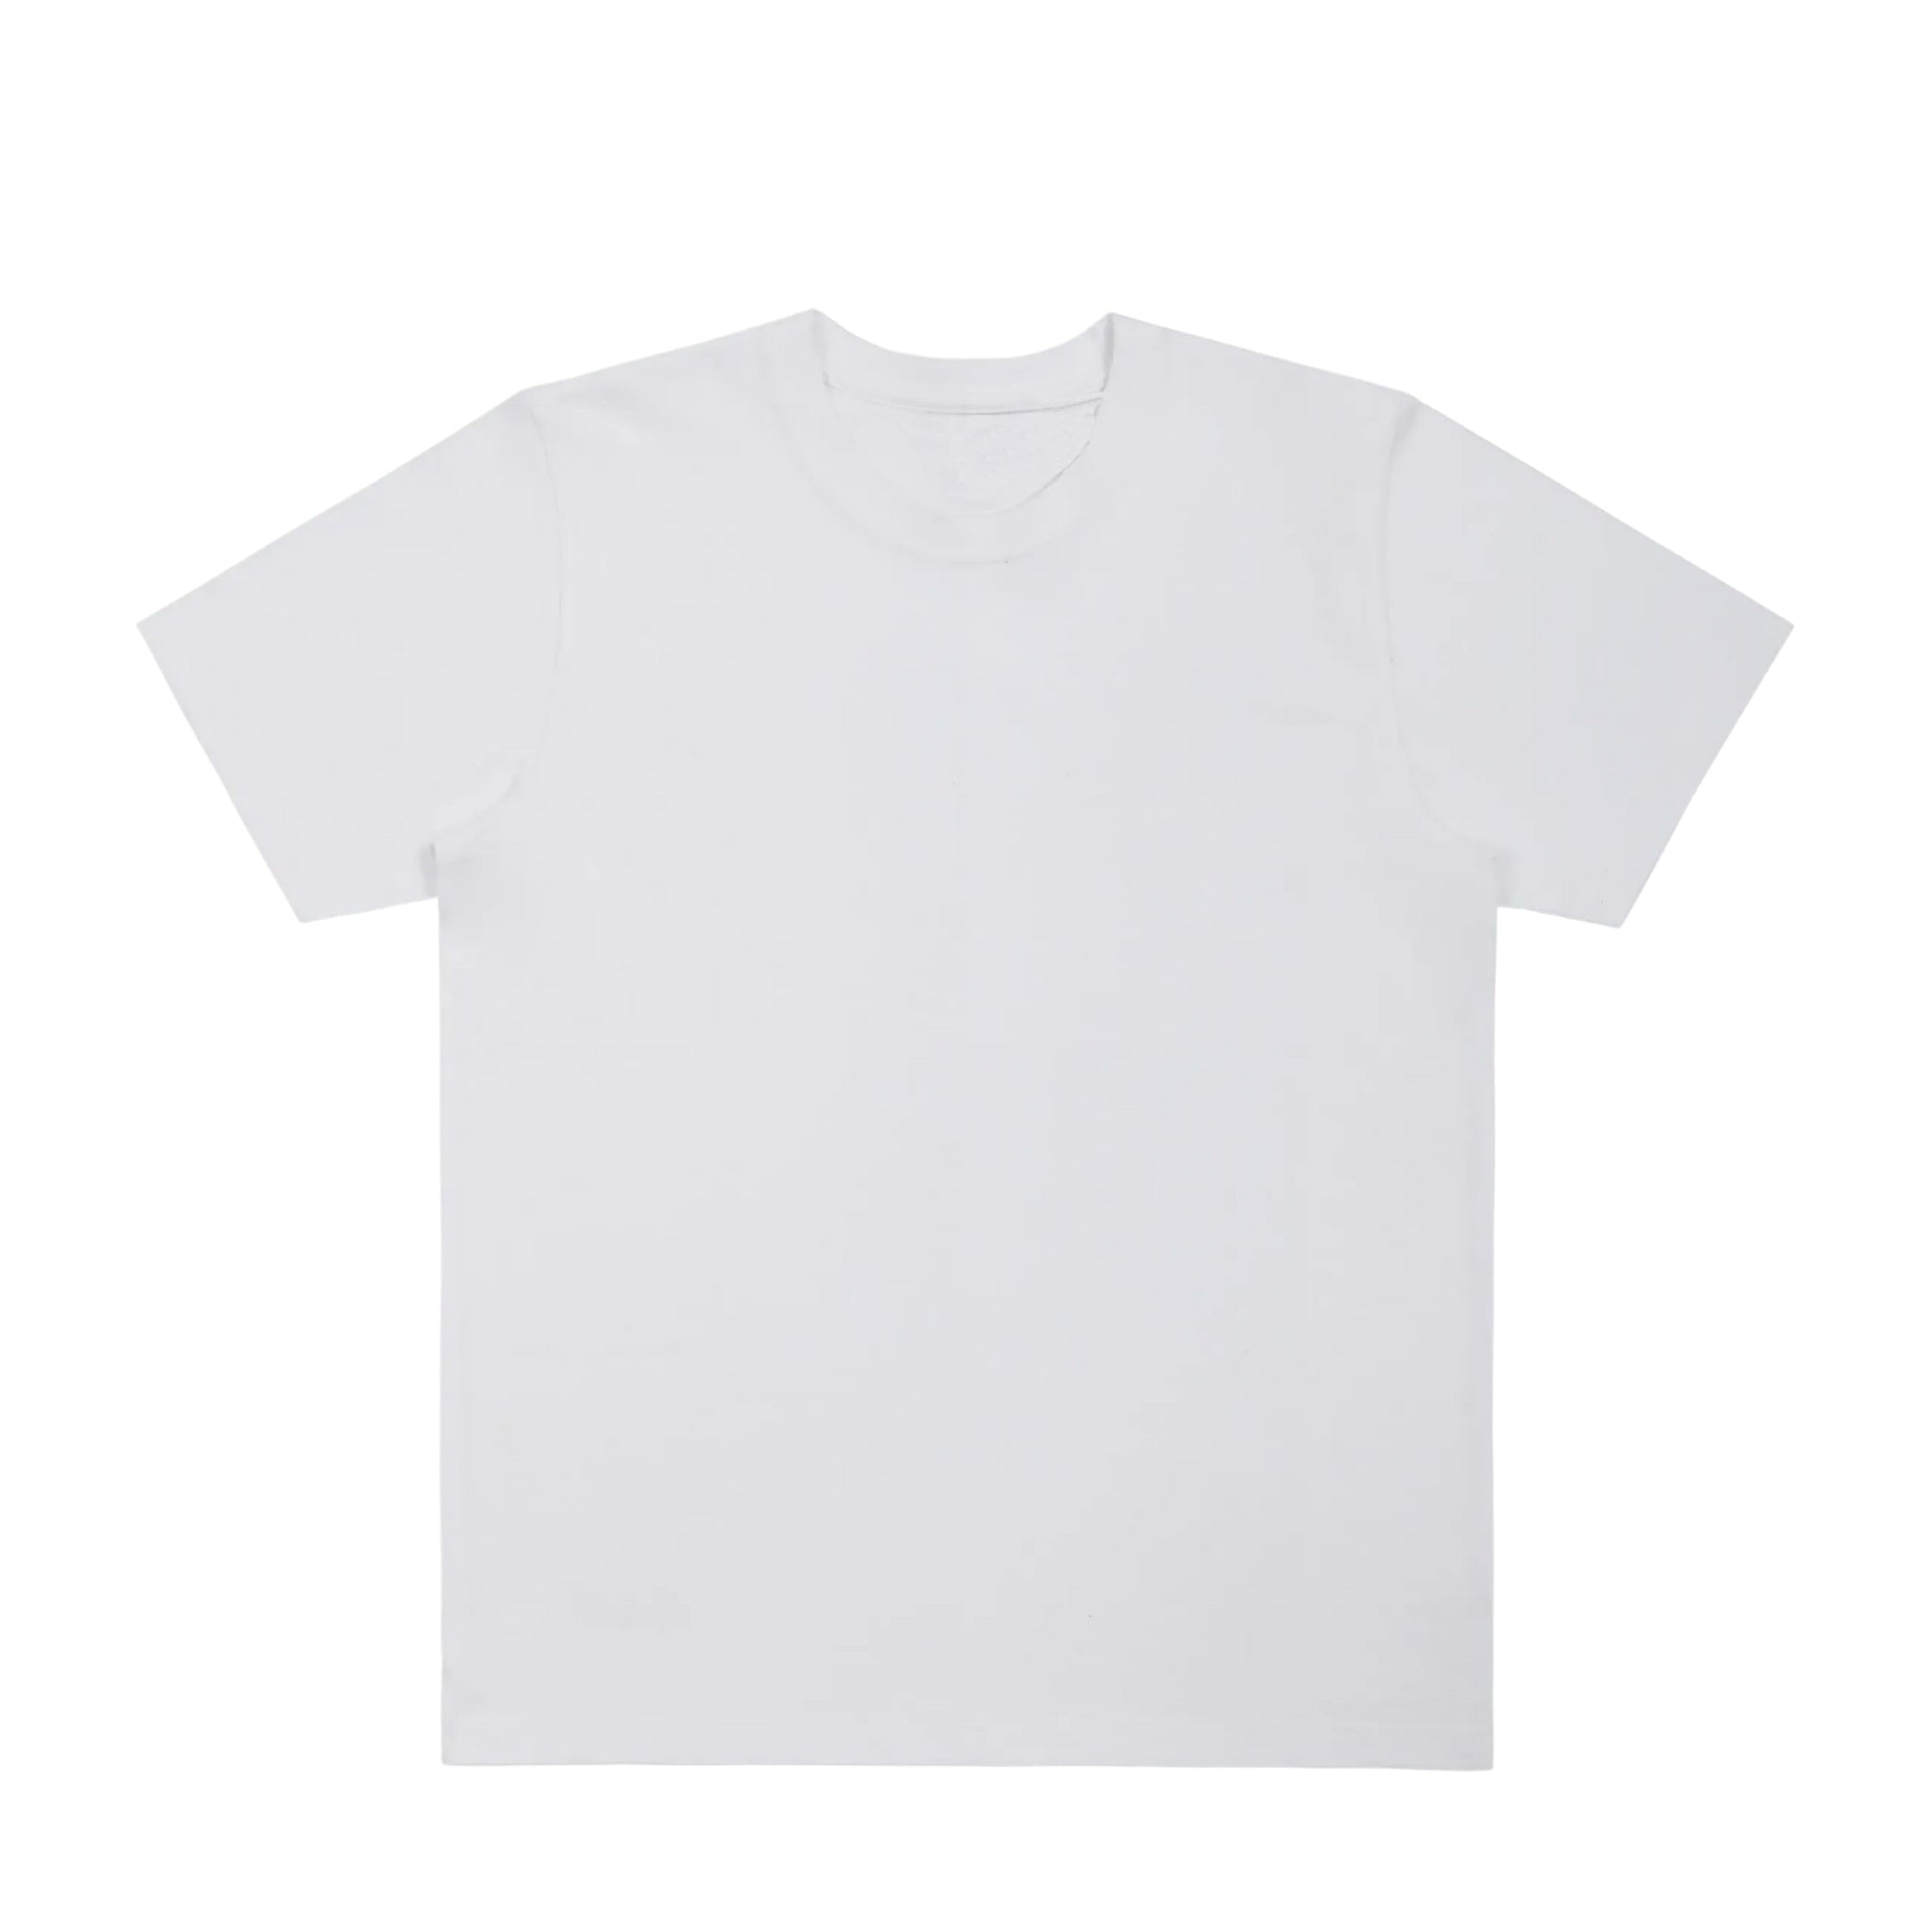 Front view of a white cotton t-shirt against a white bkground.